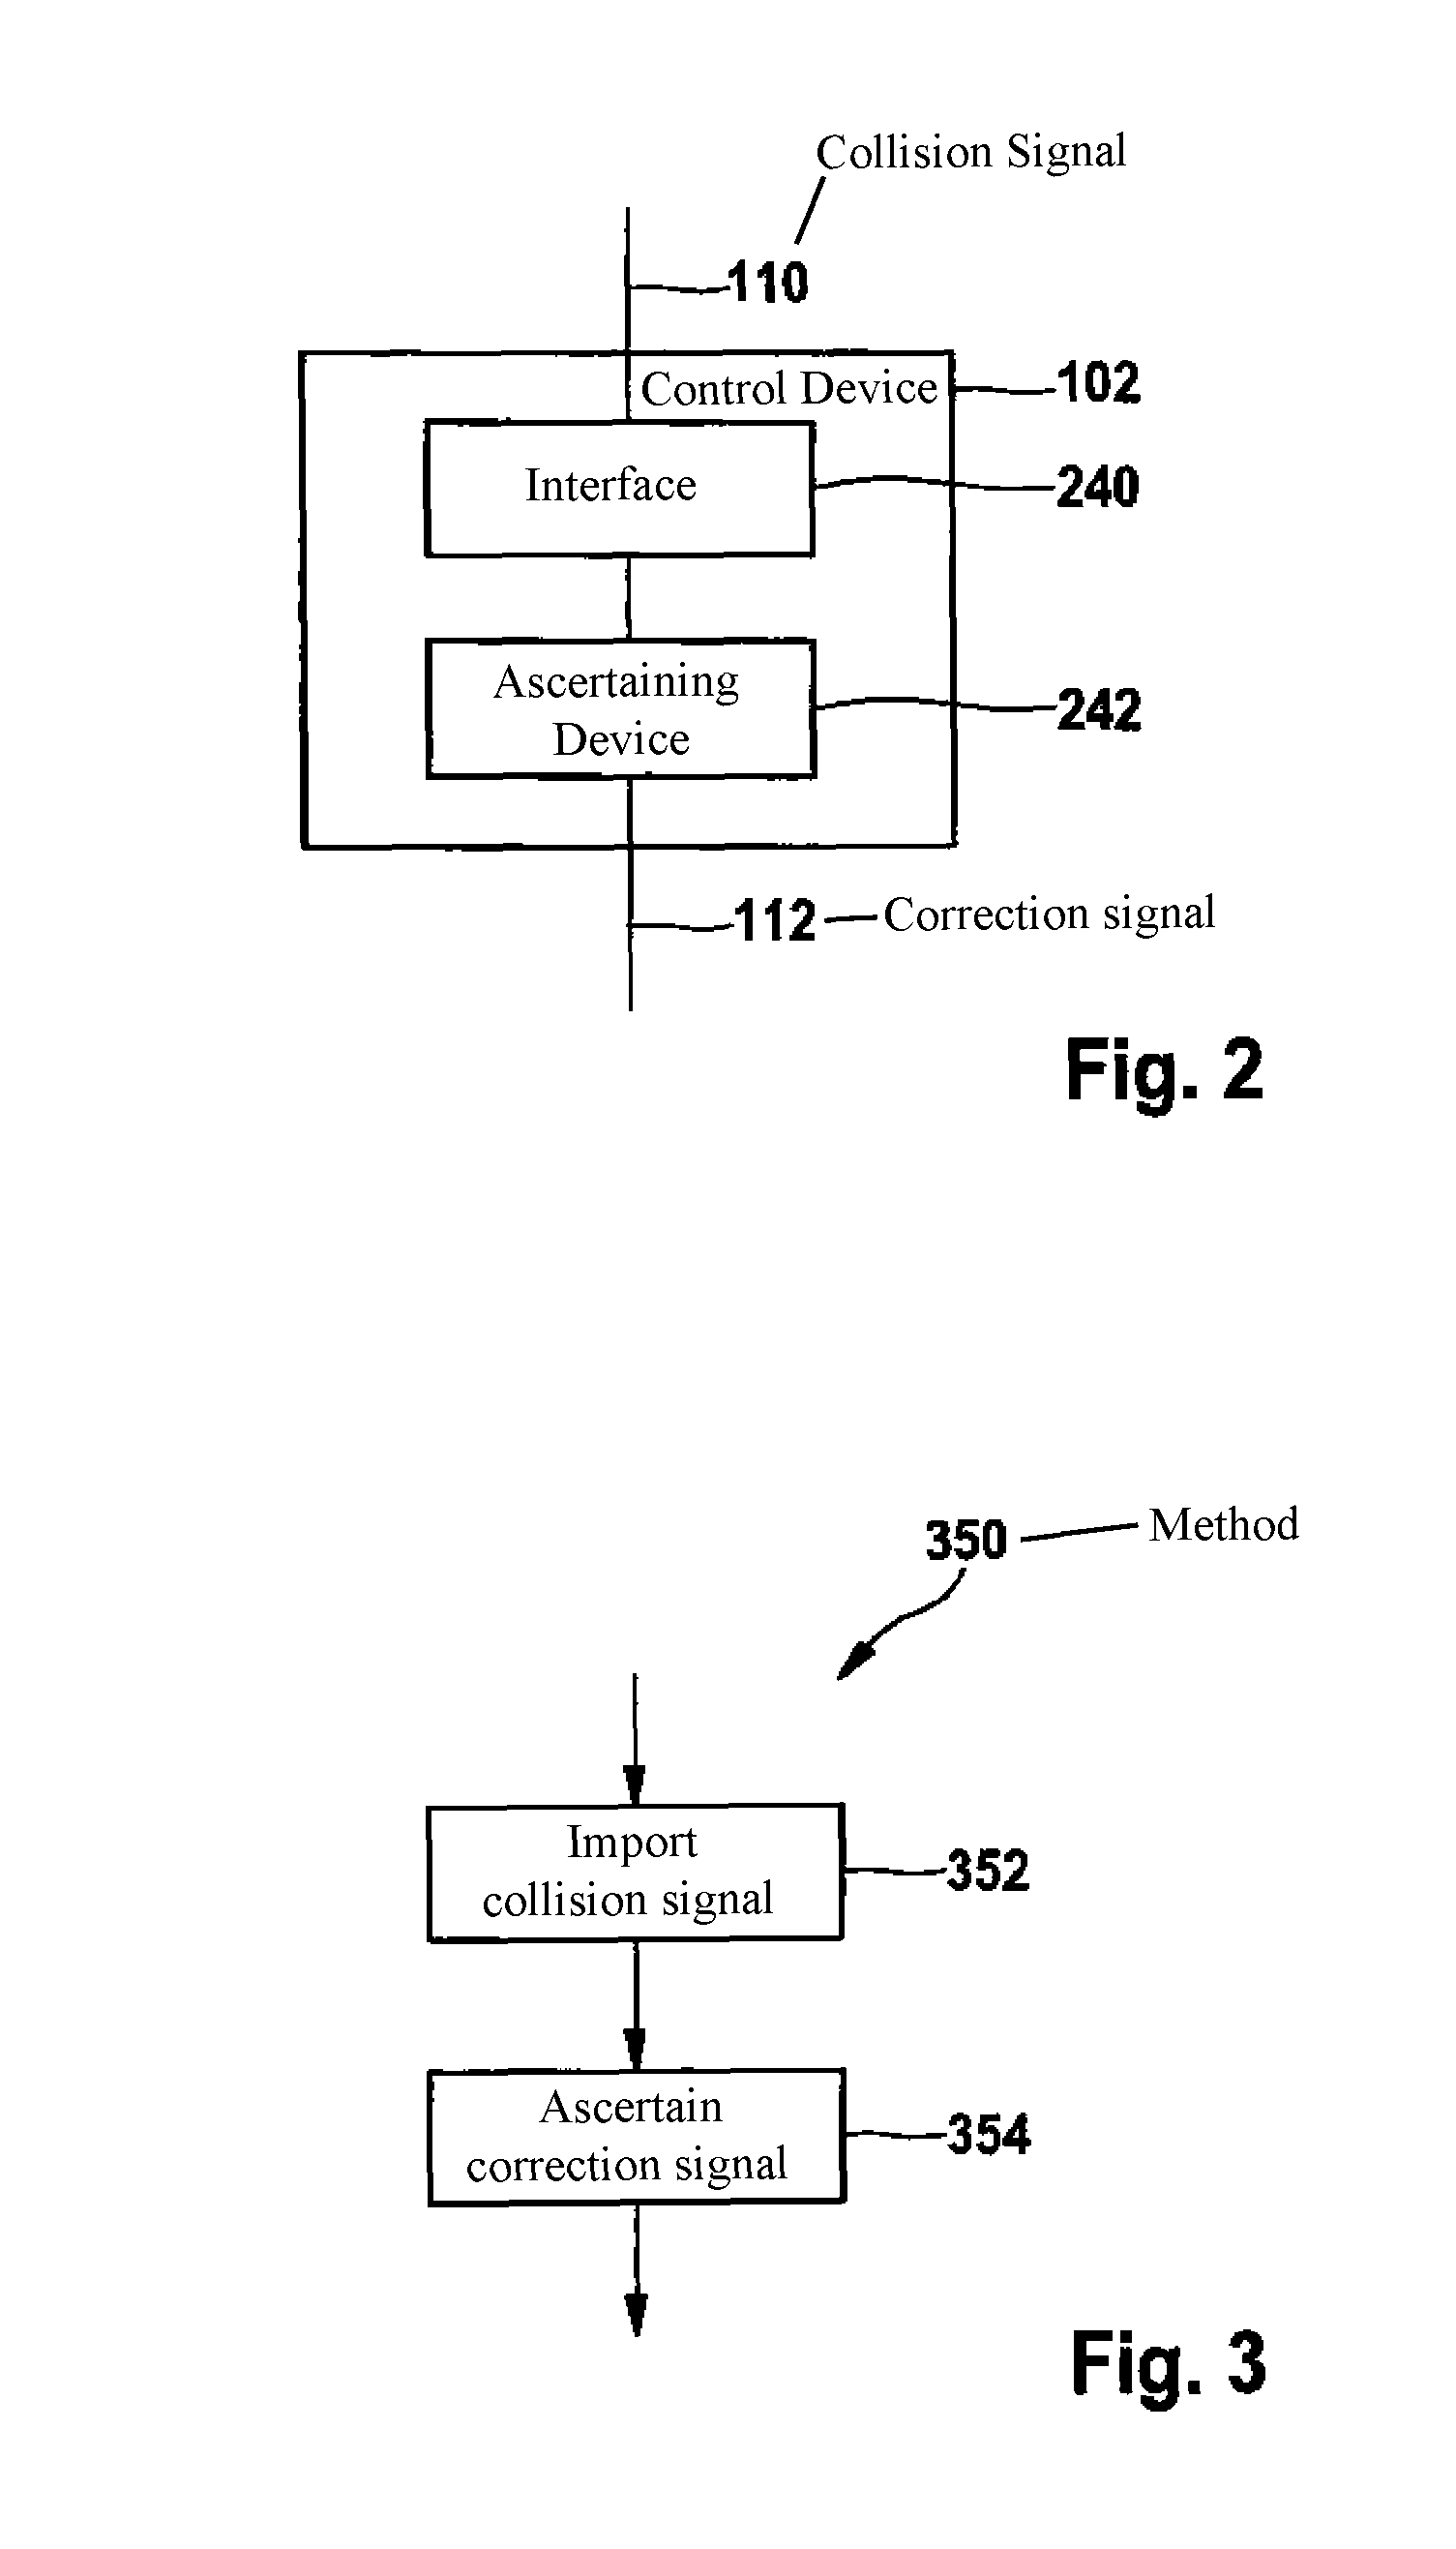 Method and control device for situation-related steering assistance in a lane keeping assistant for a vehicle